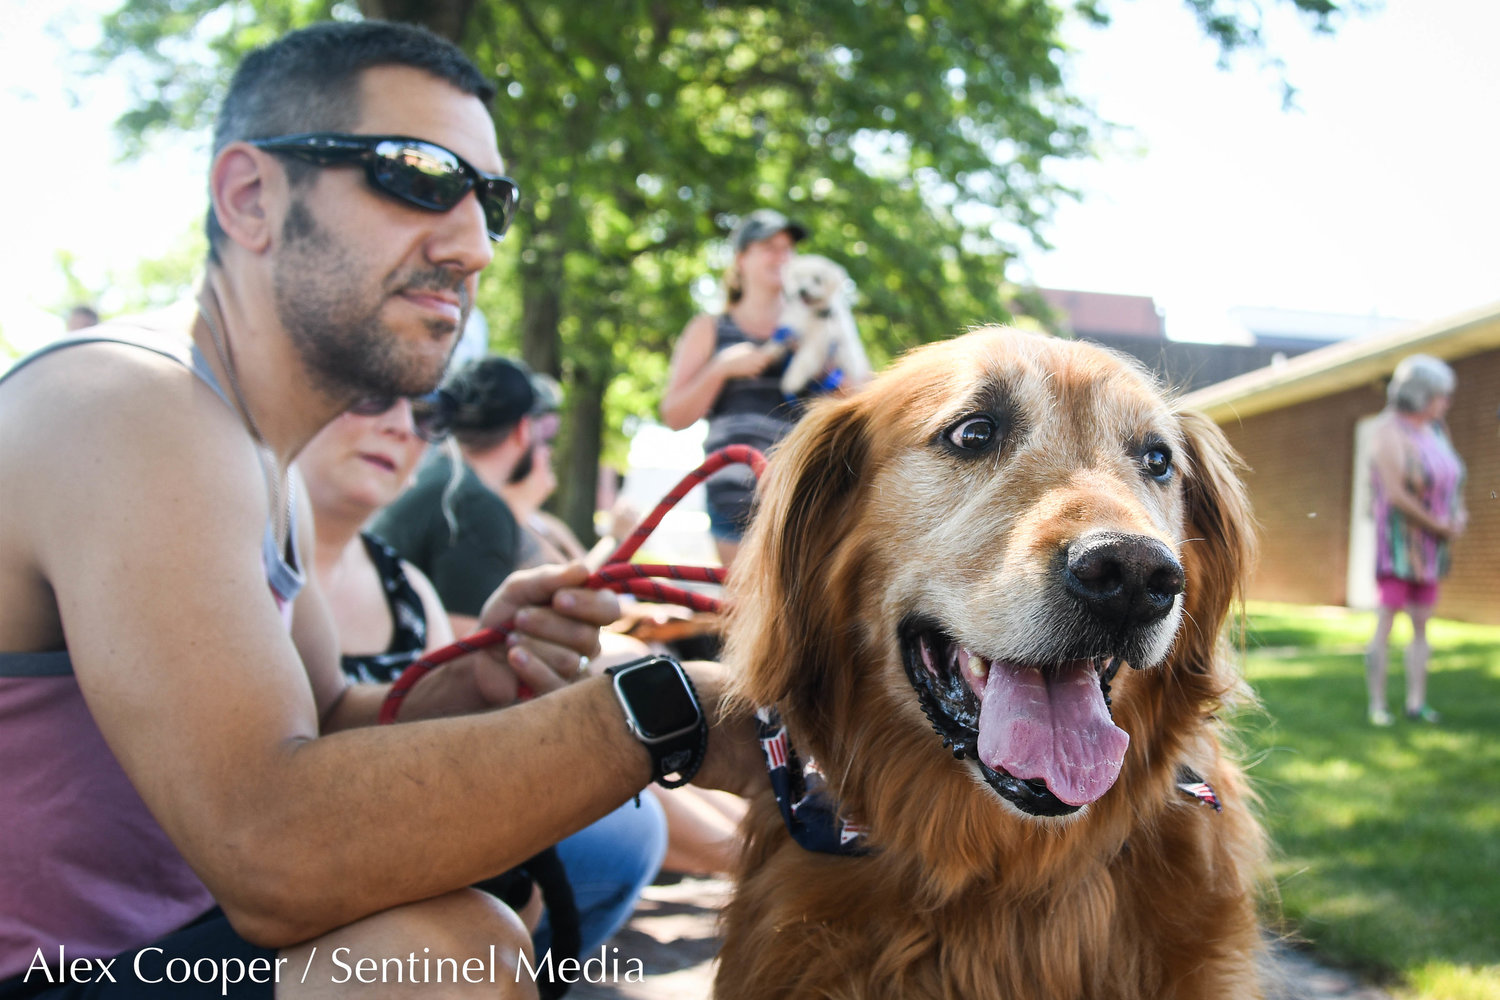 Buddy, a golden retreiver, sits patiently with his owner Ryan during a dog show hosted by the Herkimer County Humane Society on Saturday at Central Plaza in Ilion. The show was part of a long list of events hosted during Ilion Days 2022 from July 16-24.